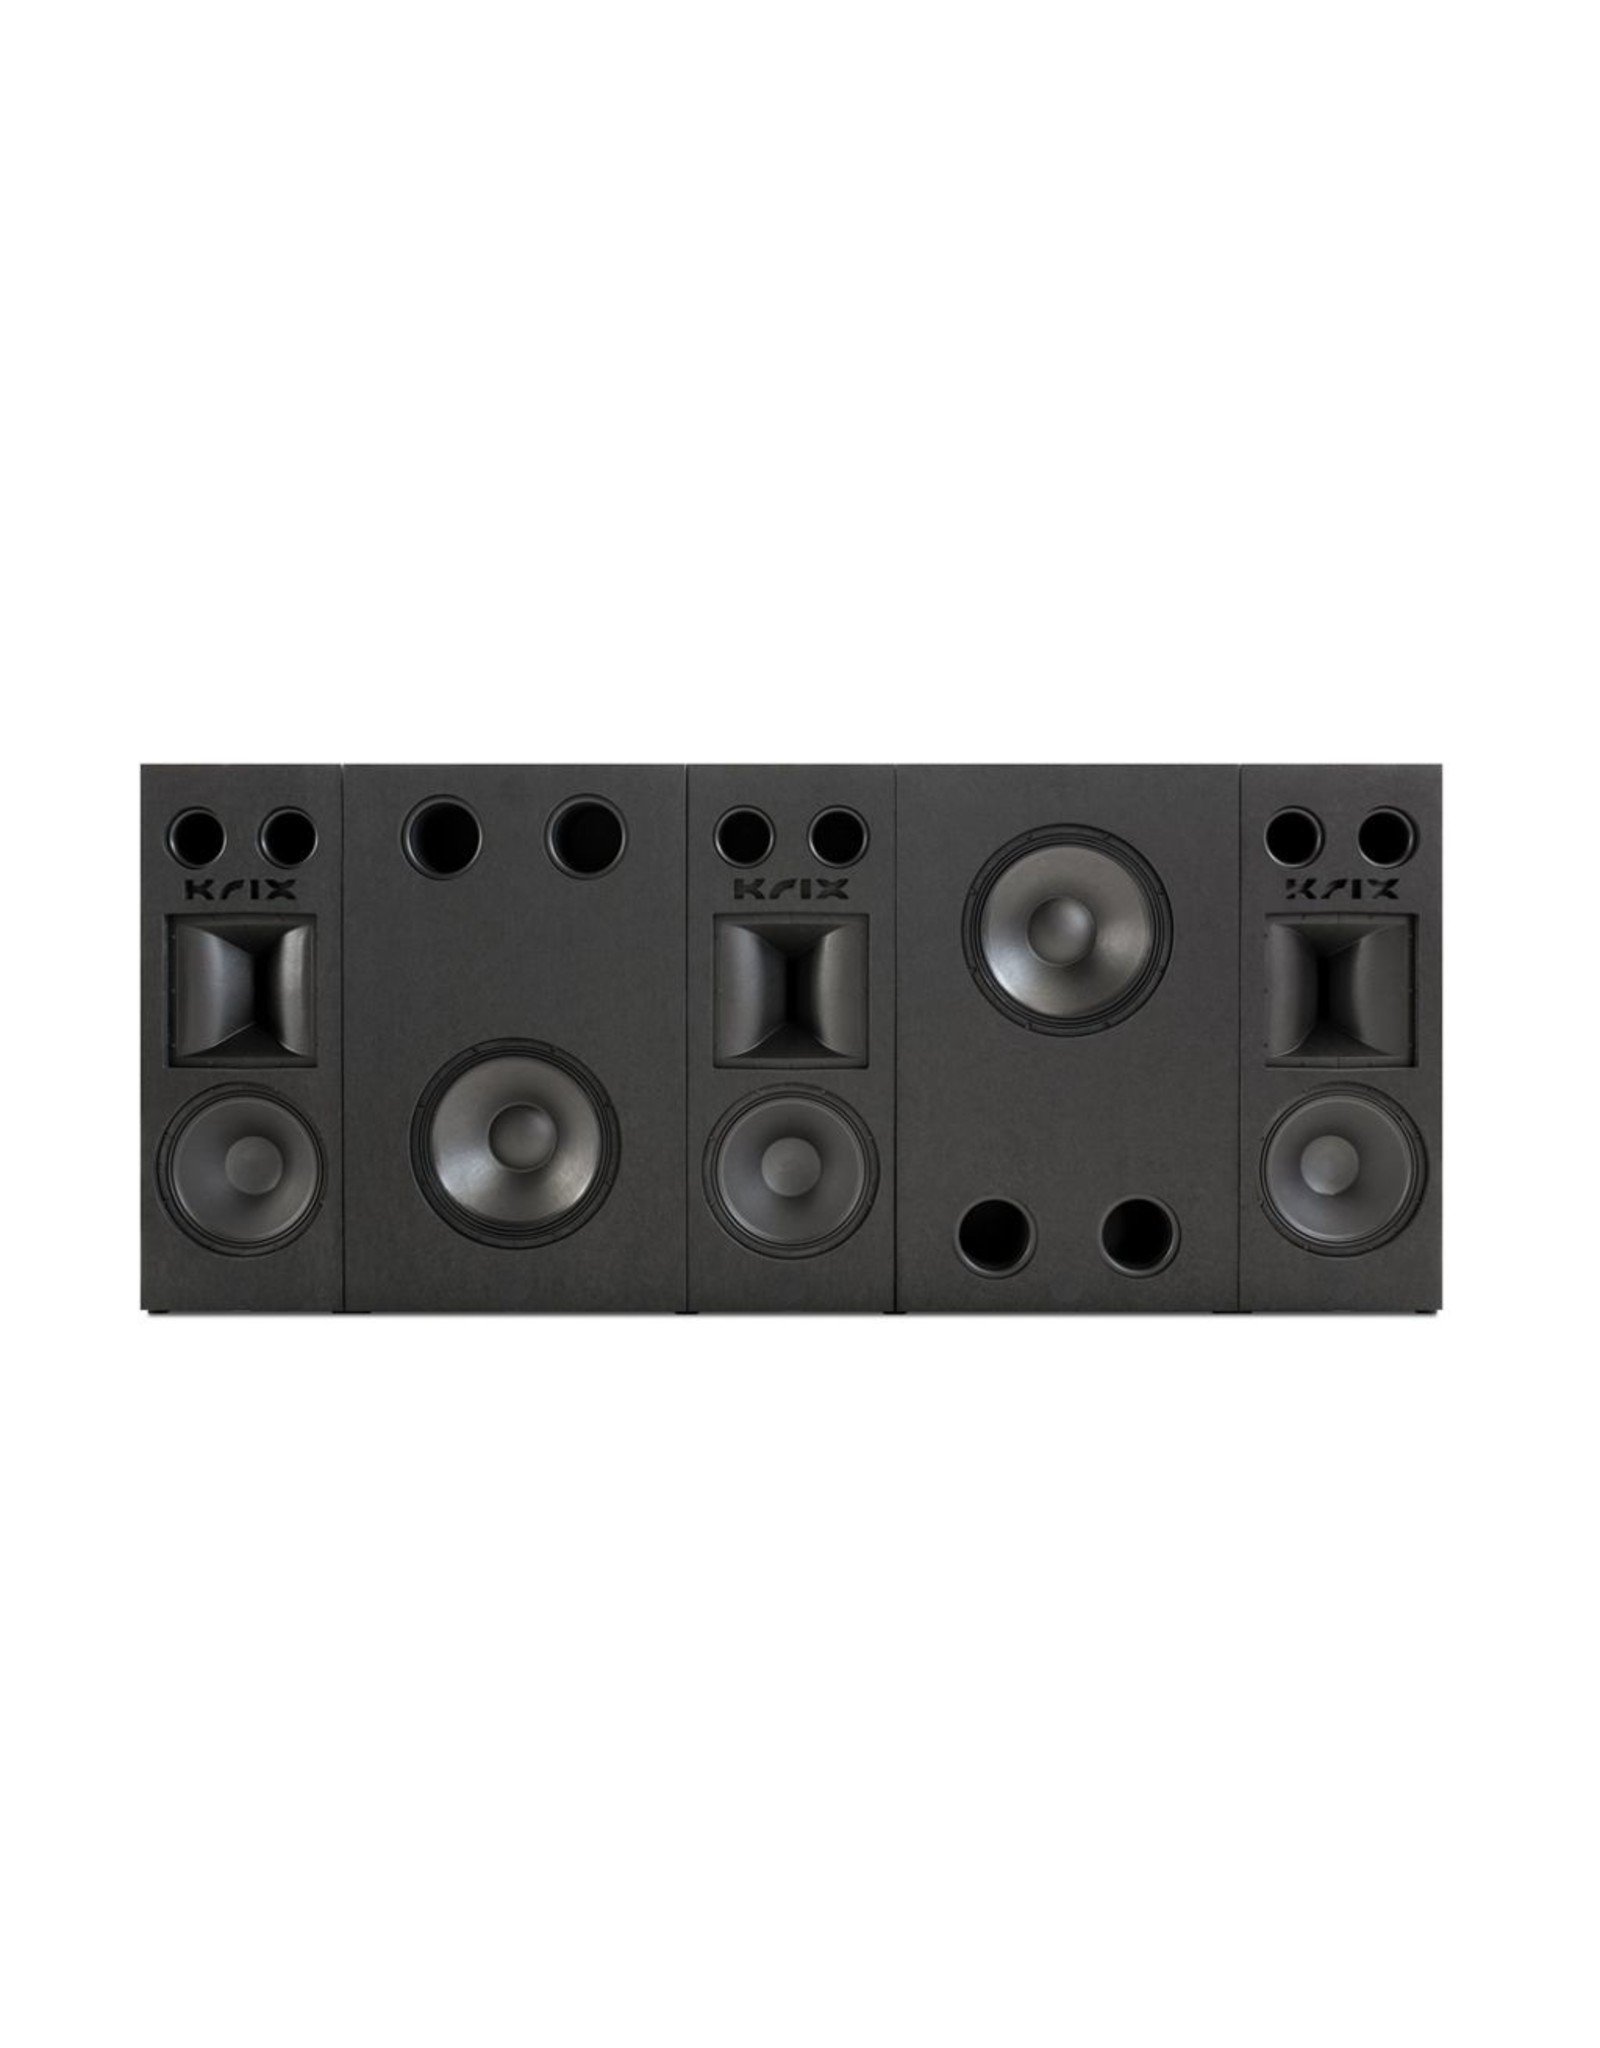 KRIX KRIX - MX-30 MODULAR FULL BEHIND SCREEN SYSTEM Total System Dimensions: 1218mm High (including feet) x 2865mm Wide x 335mm Deep Comprising three main channel modules (left, centre, right), each module including: - High Frequency Krix patented horn wit